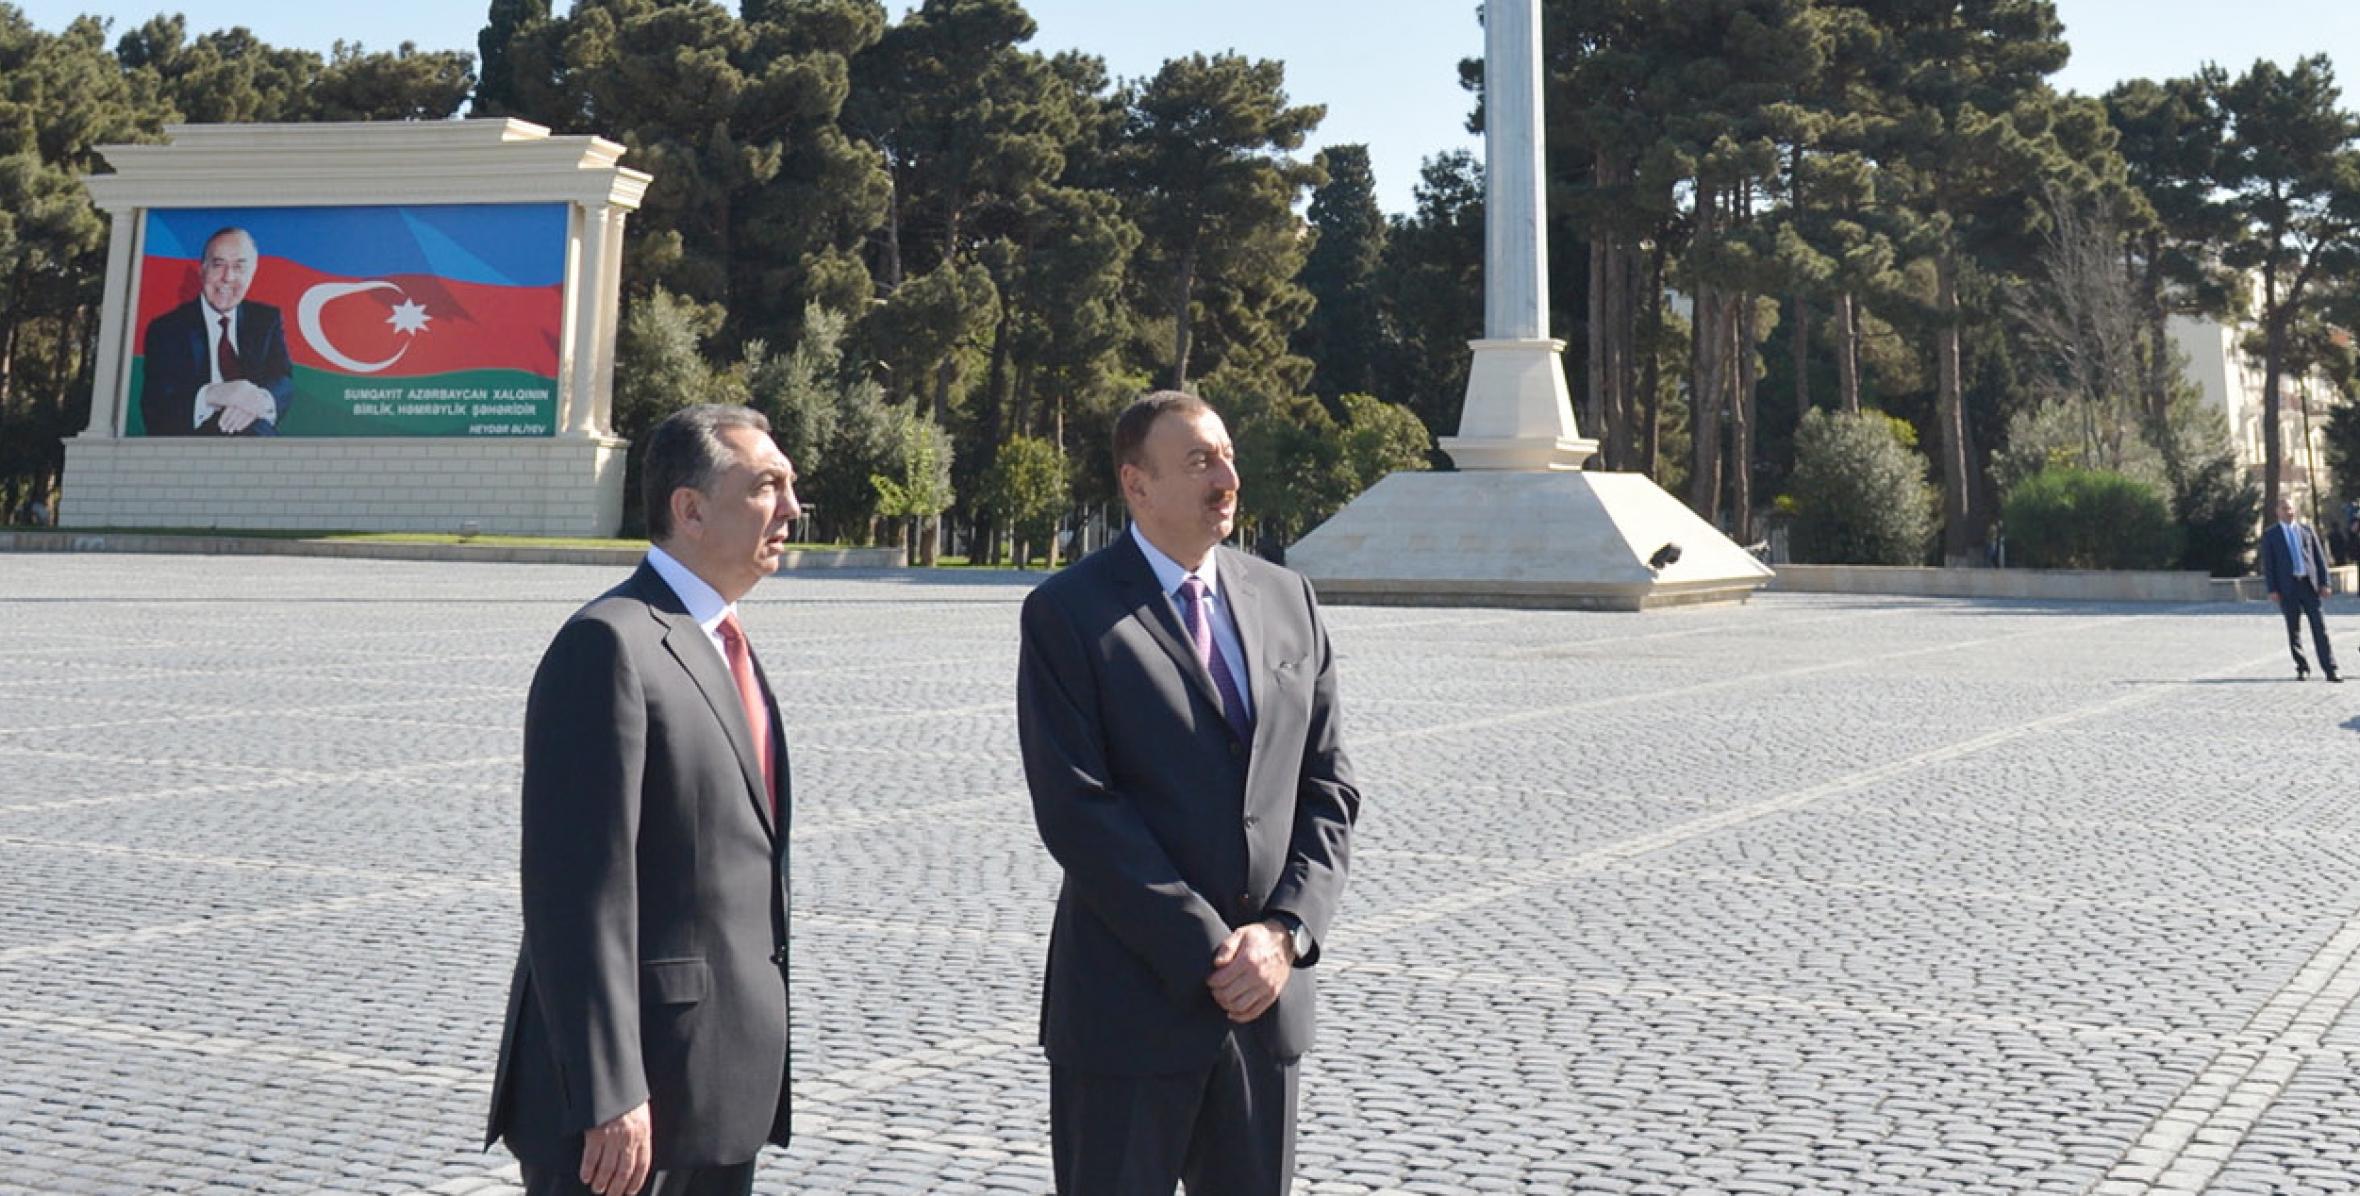 Ilham Aliyev examined the Flag Square in Sumgayit